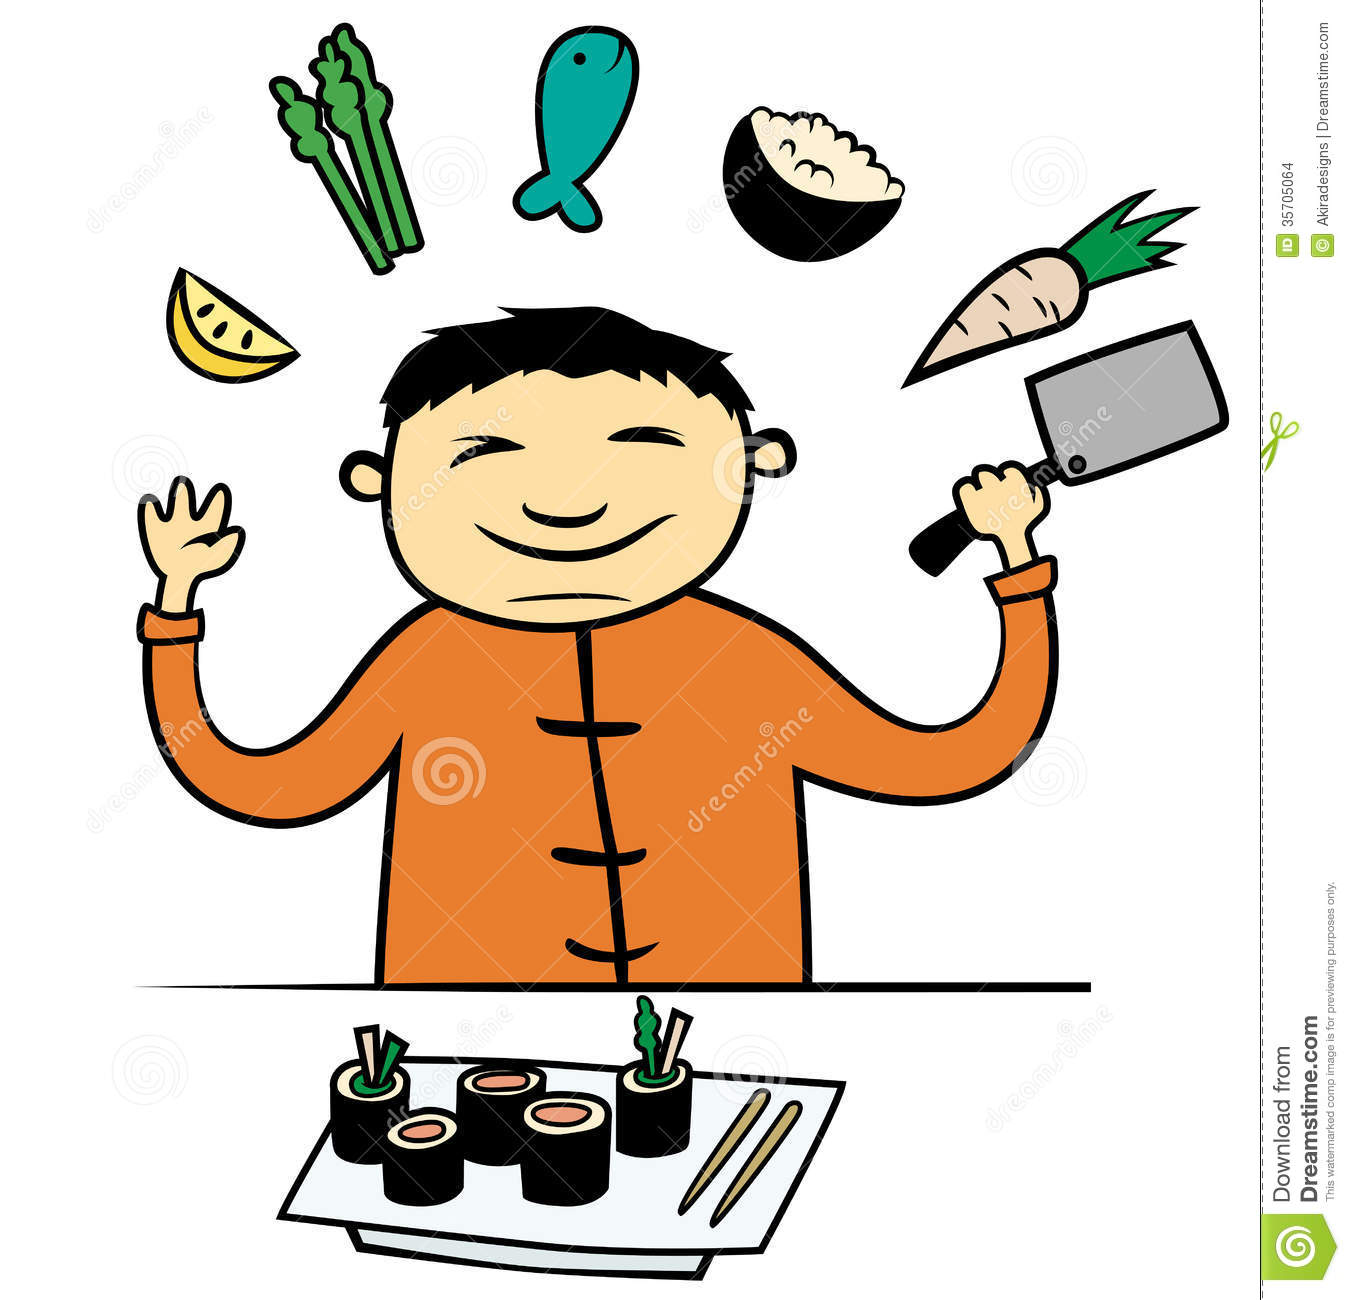 Cartoon Vector Illustration Of Asian Chinese Or Japanese Cook Or Chef